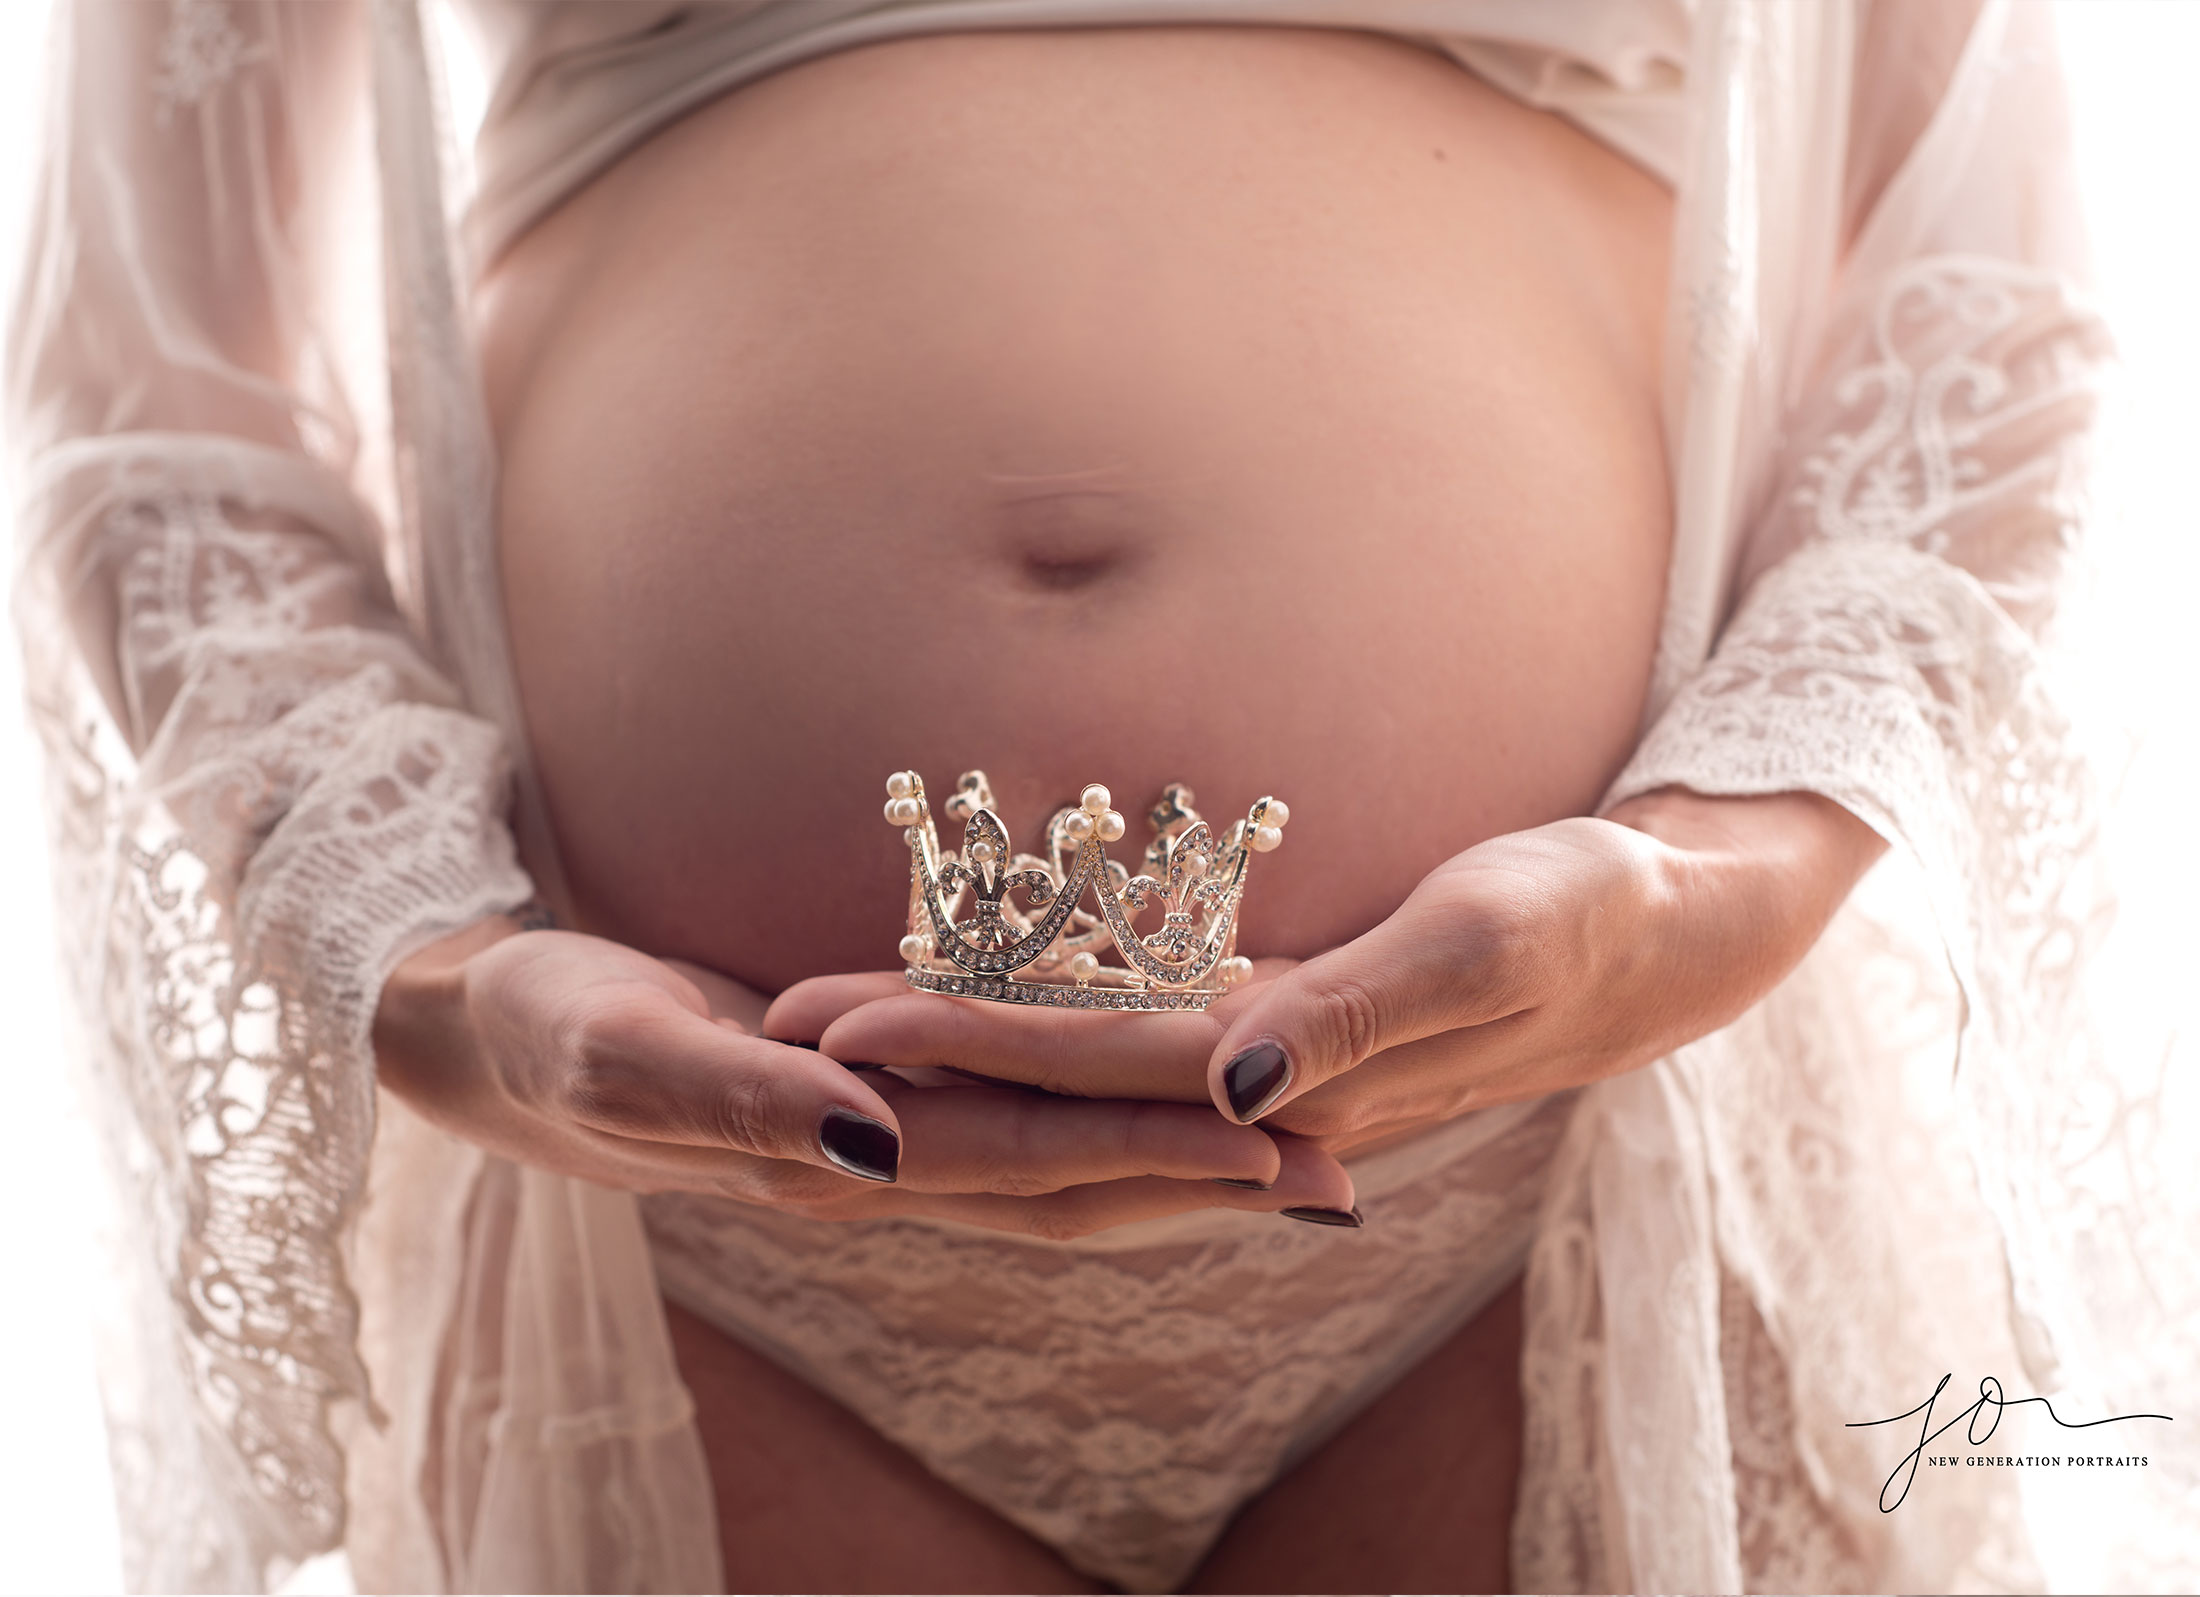 Holding princess or prince crown in front of baby bump. Captured by New Generation Portraits.